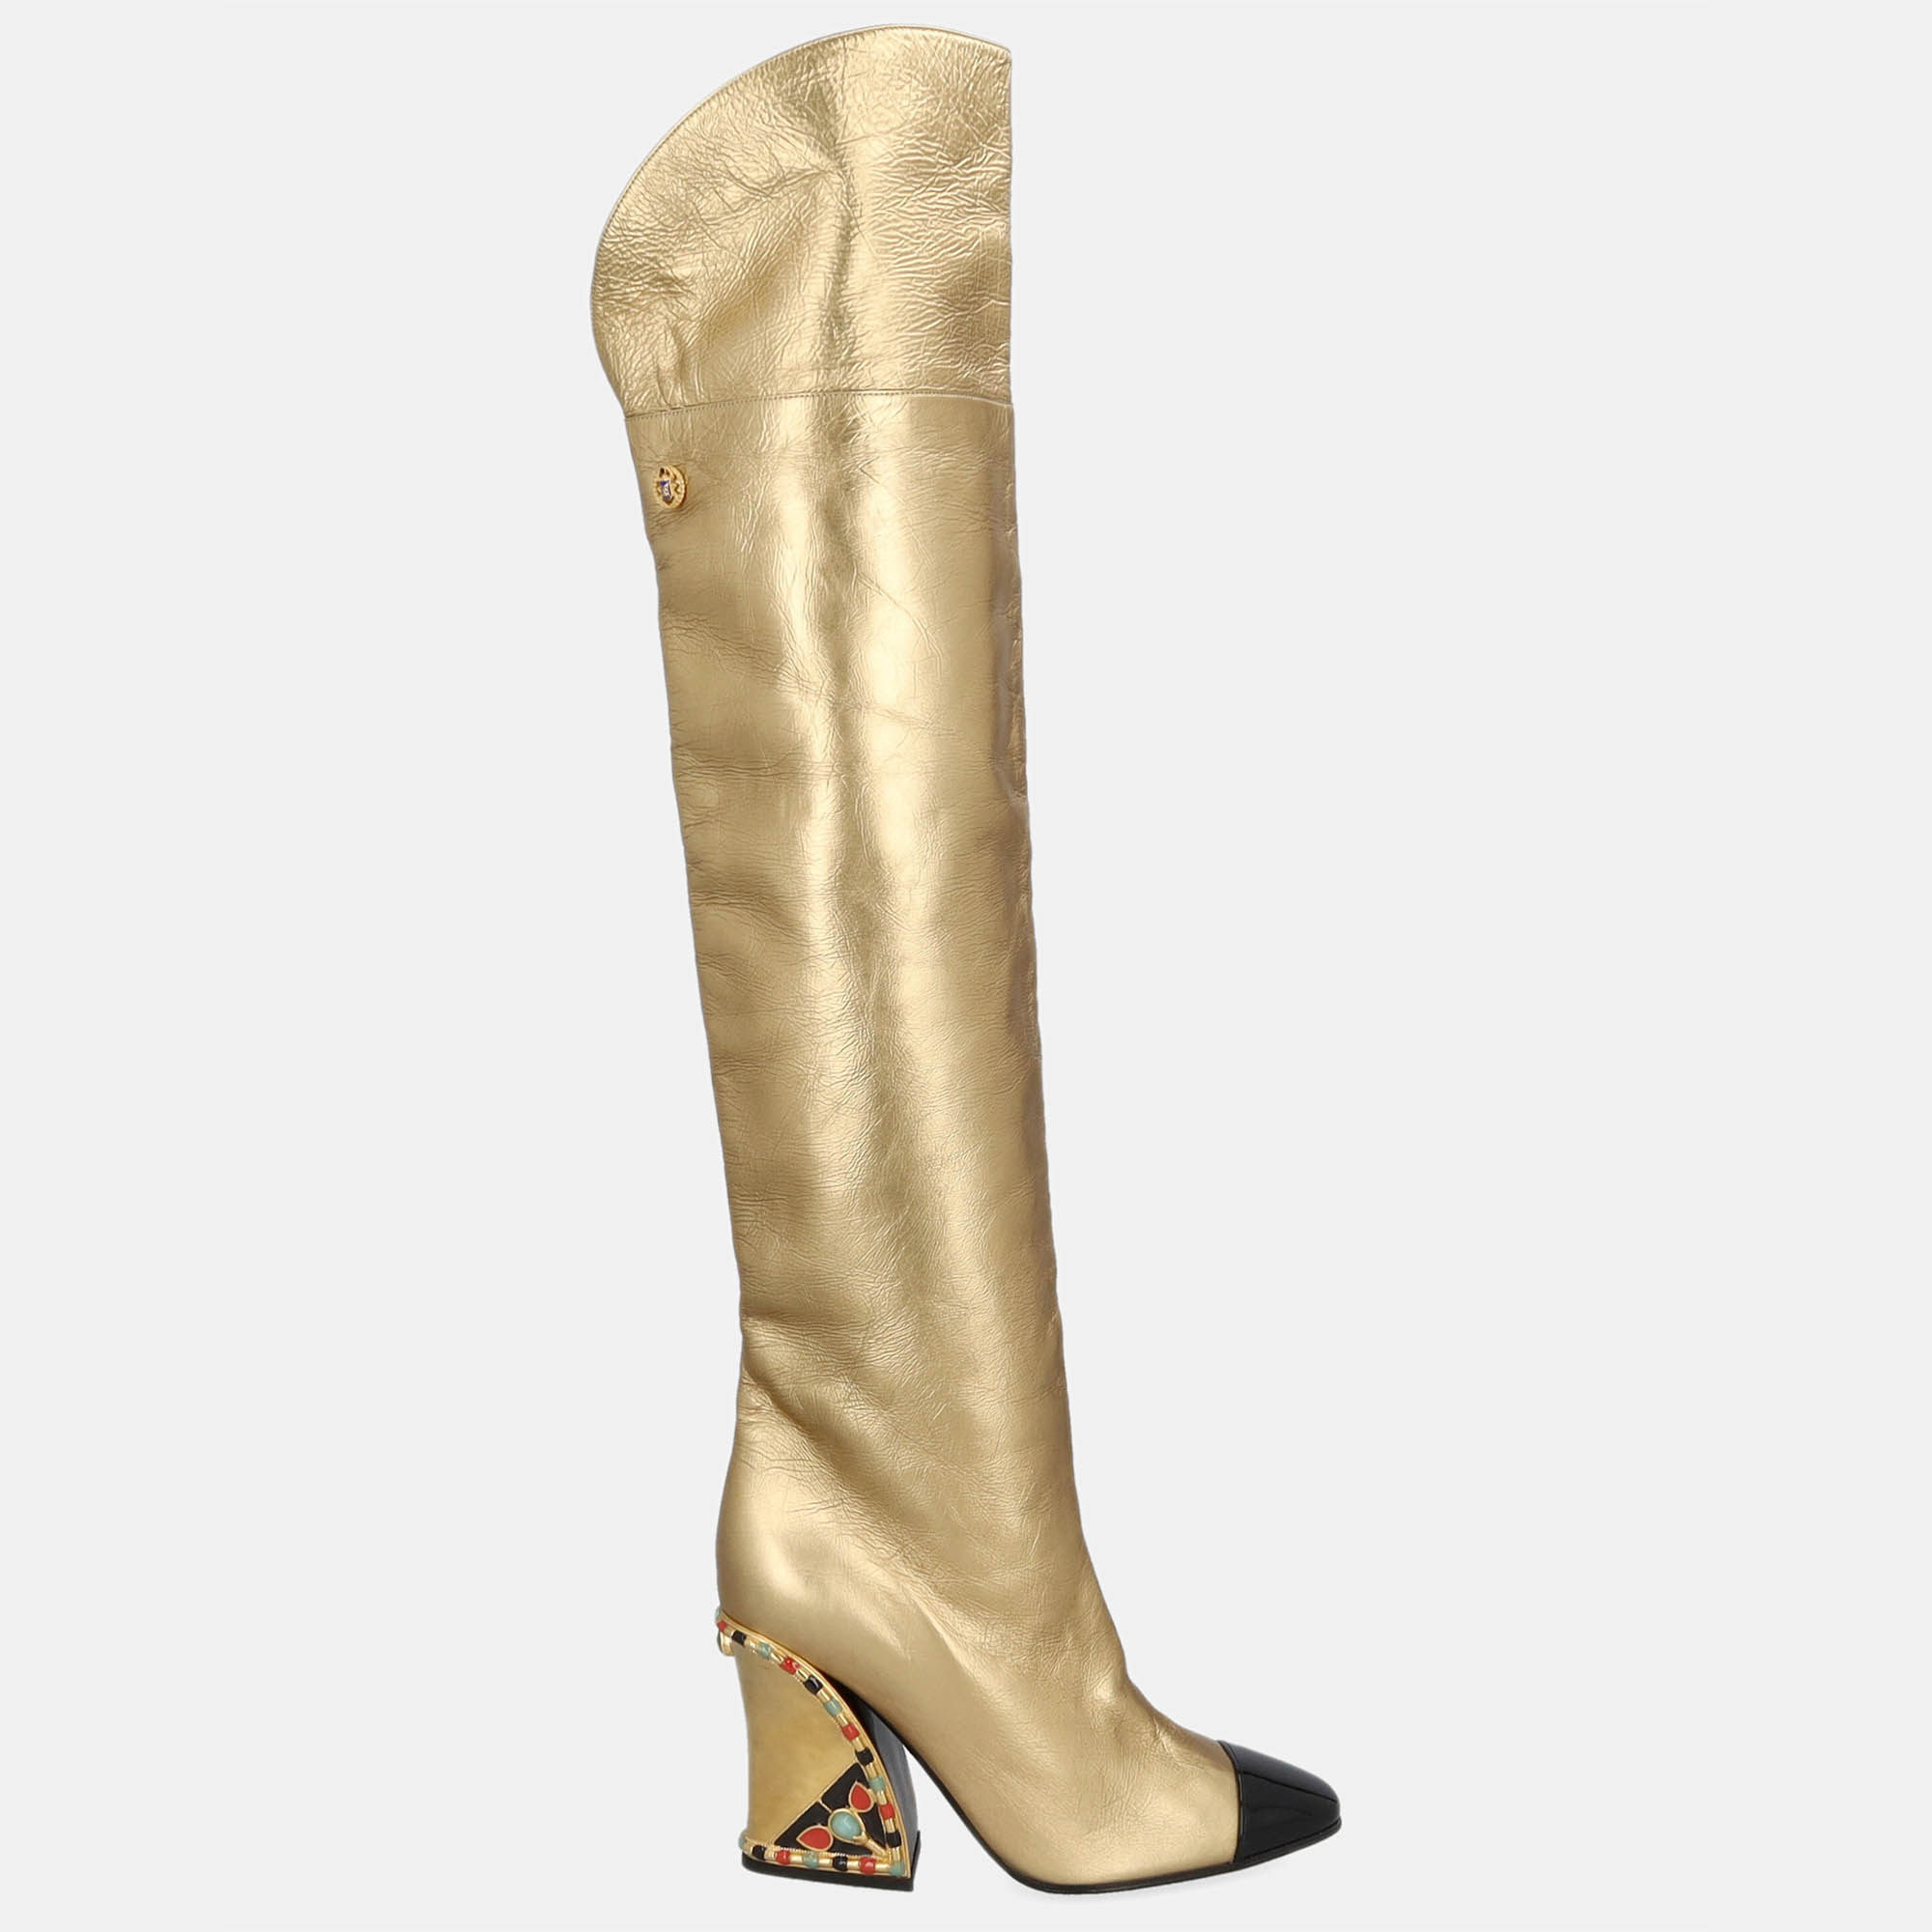 Chanel  Women's Leather Boots - Gold - EU 38